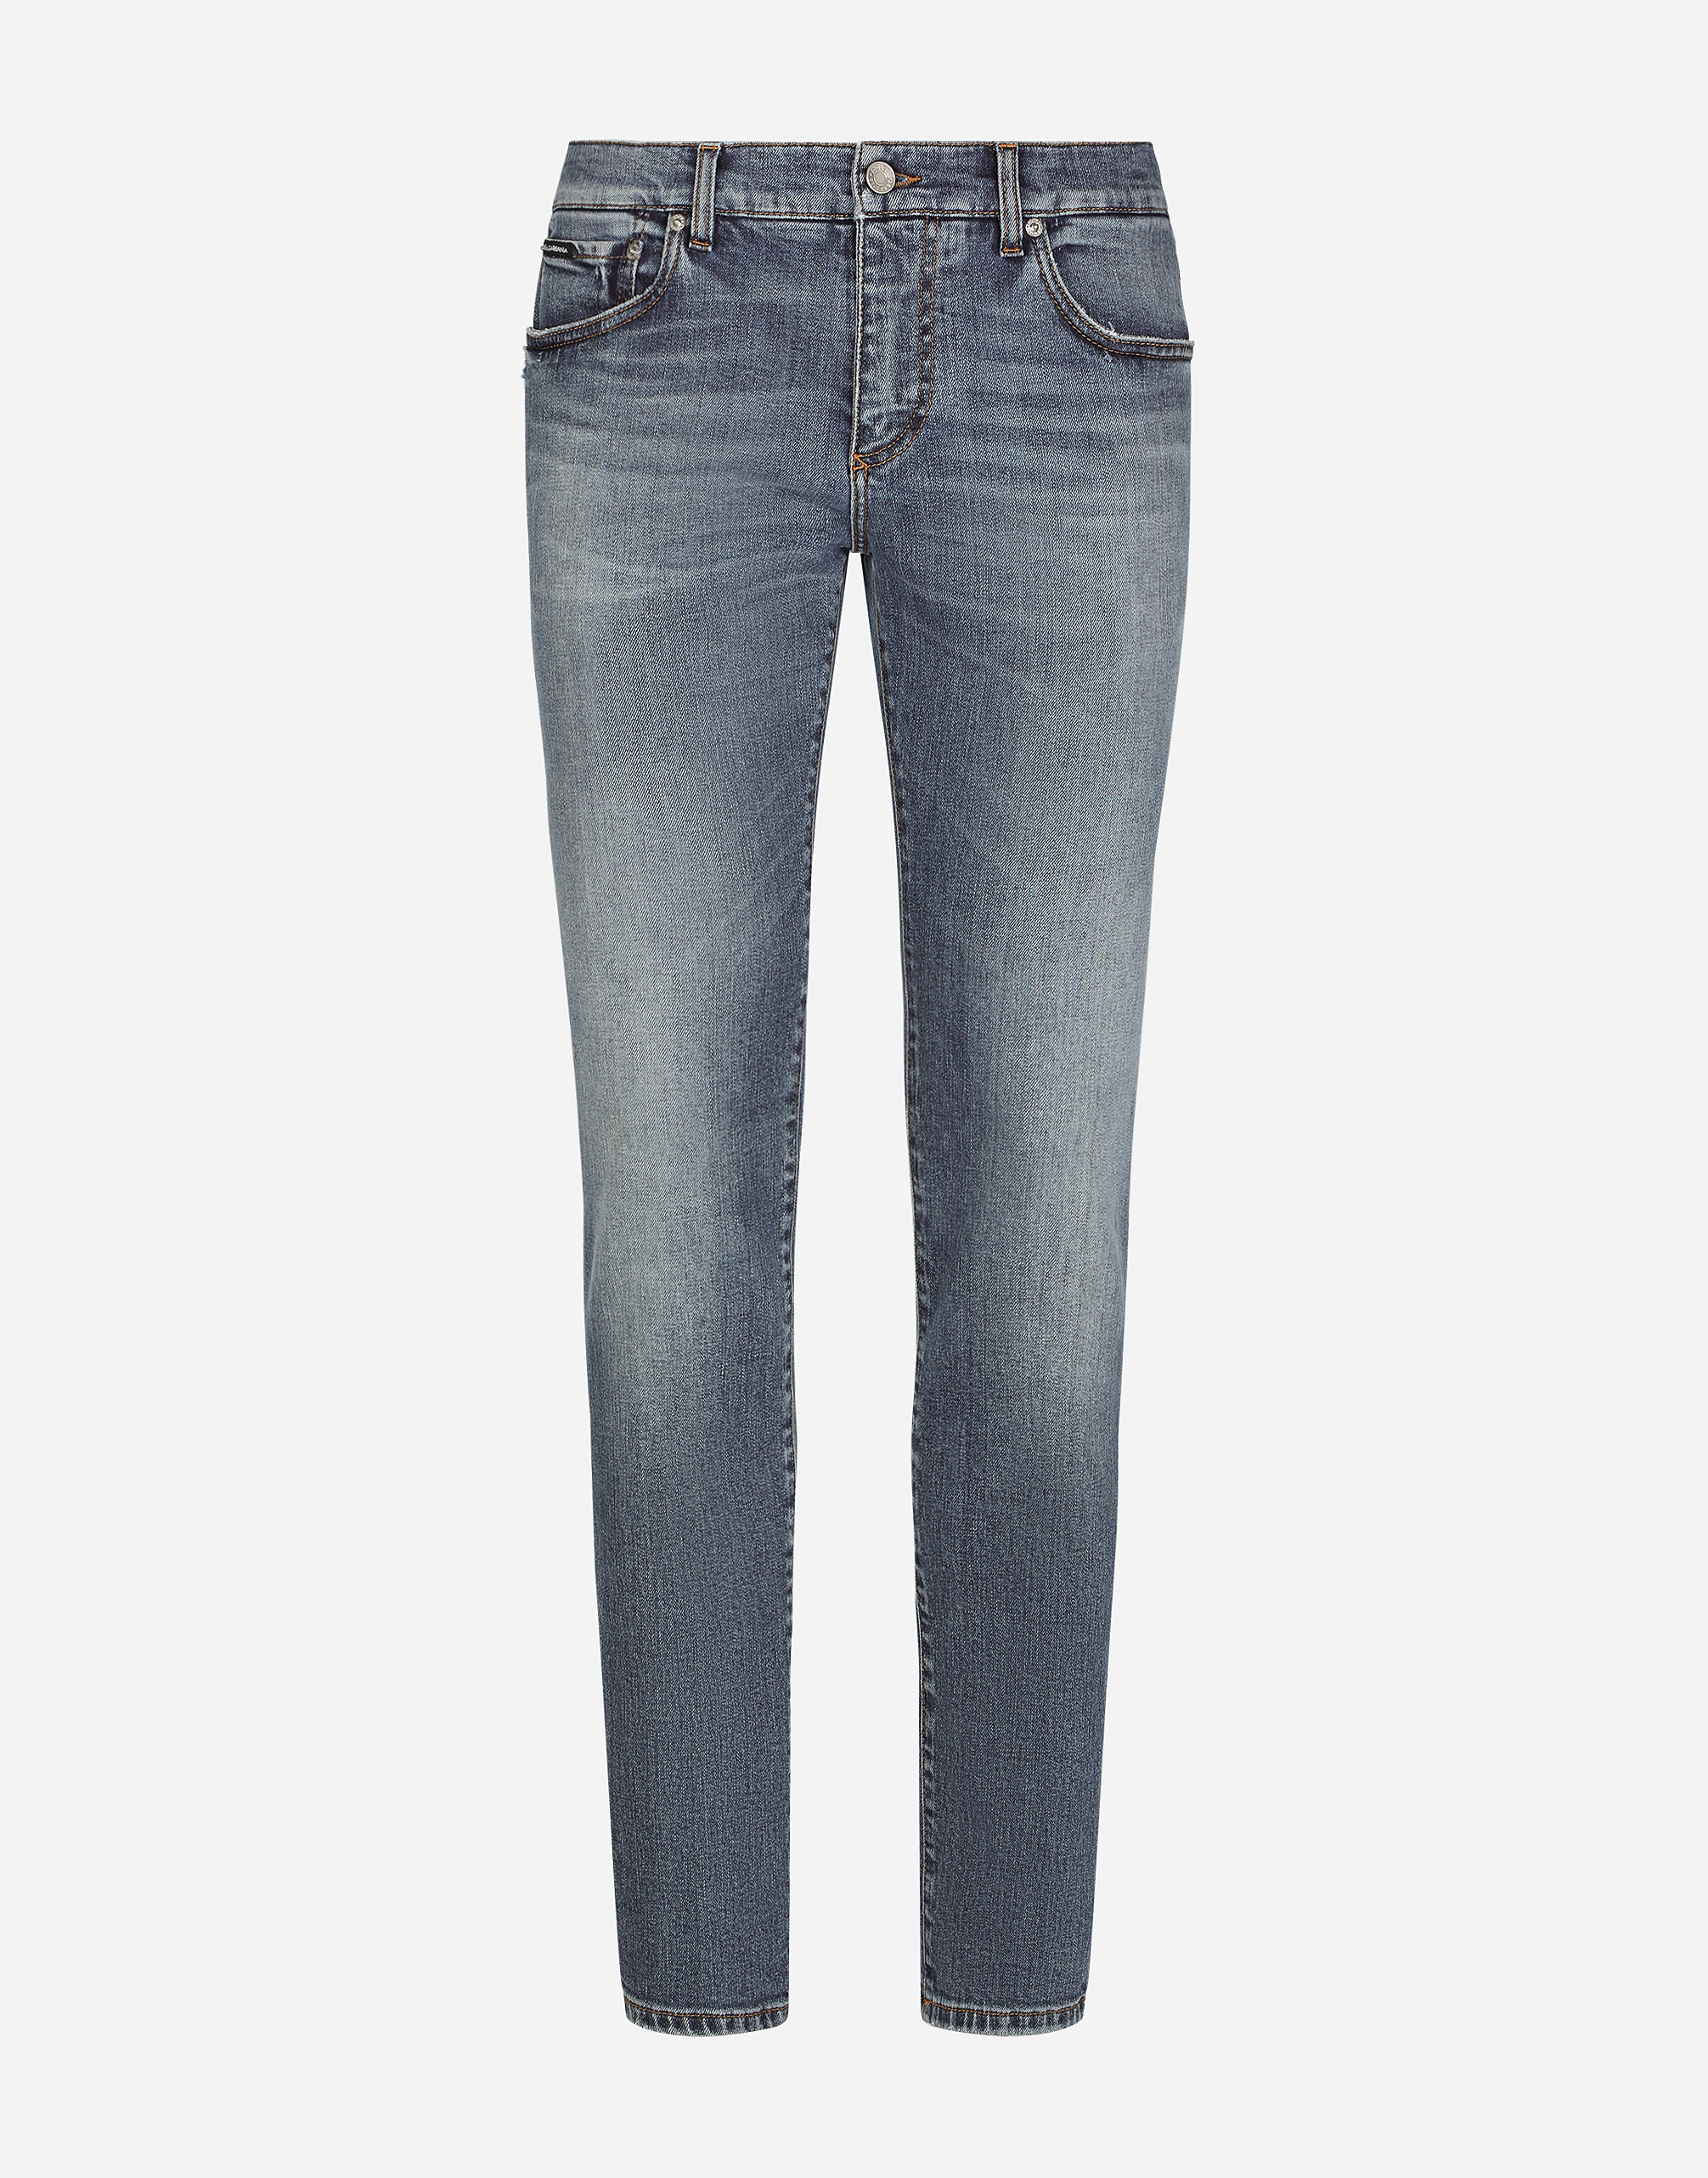 Dolce & Gabbana Light Blue Skinny Stretch Jeans With Whiskering